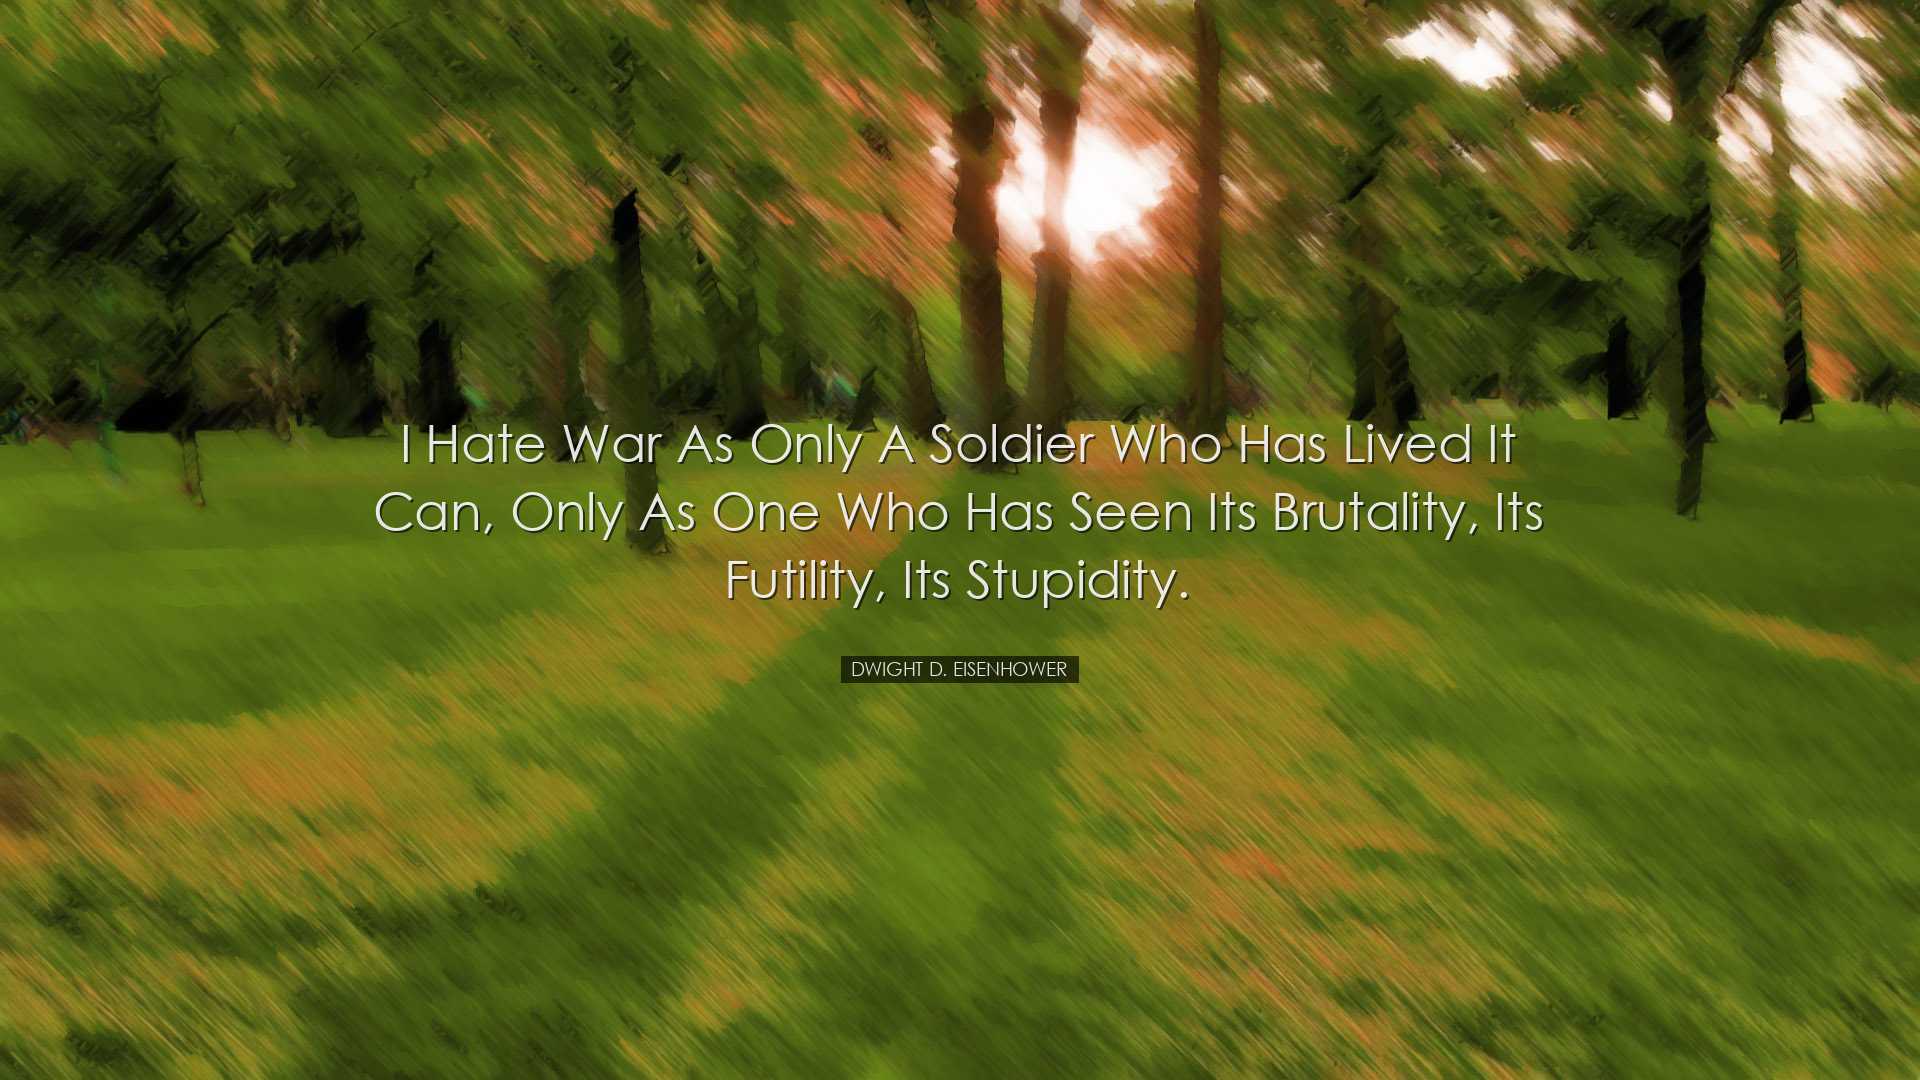 I hate war as only a soldier who has lived it can, only as one who